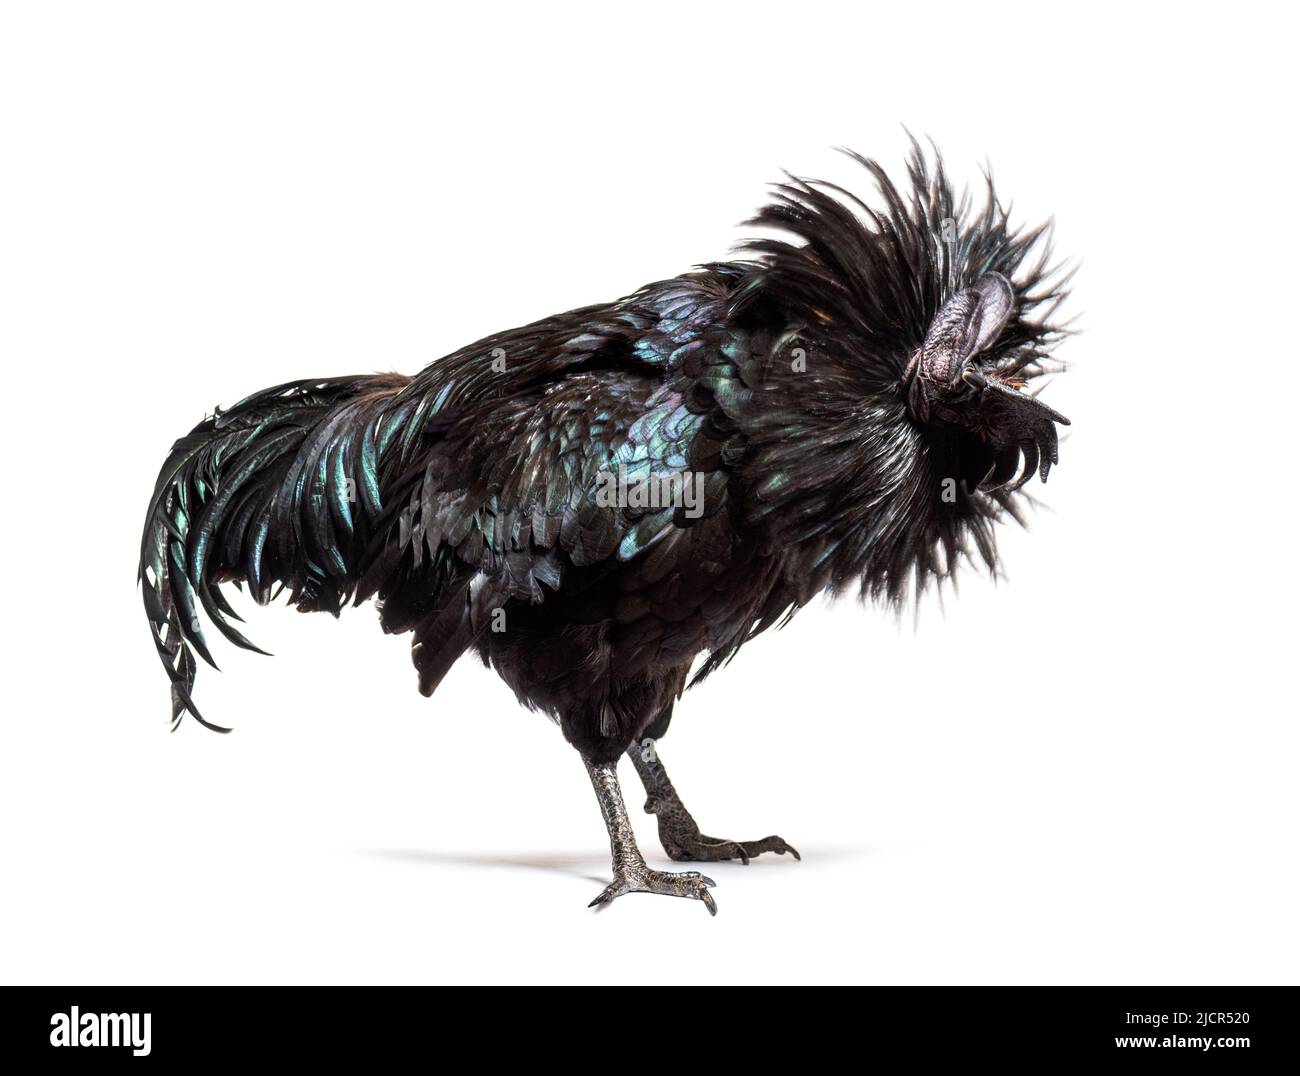 Ayam Cemani rooster ruffling its feathers, isolated on white Stock Photo